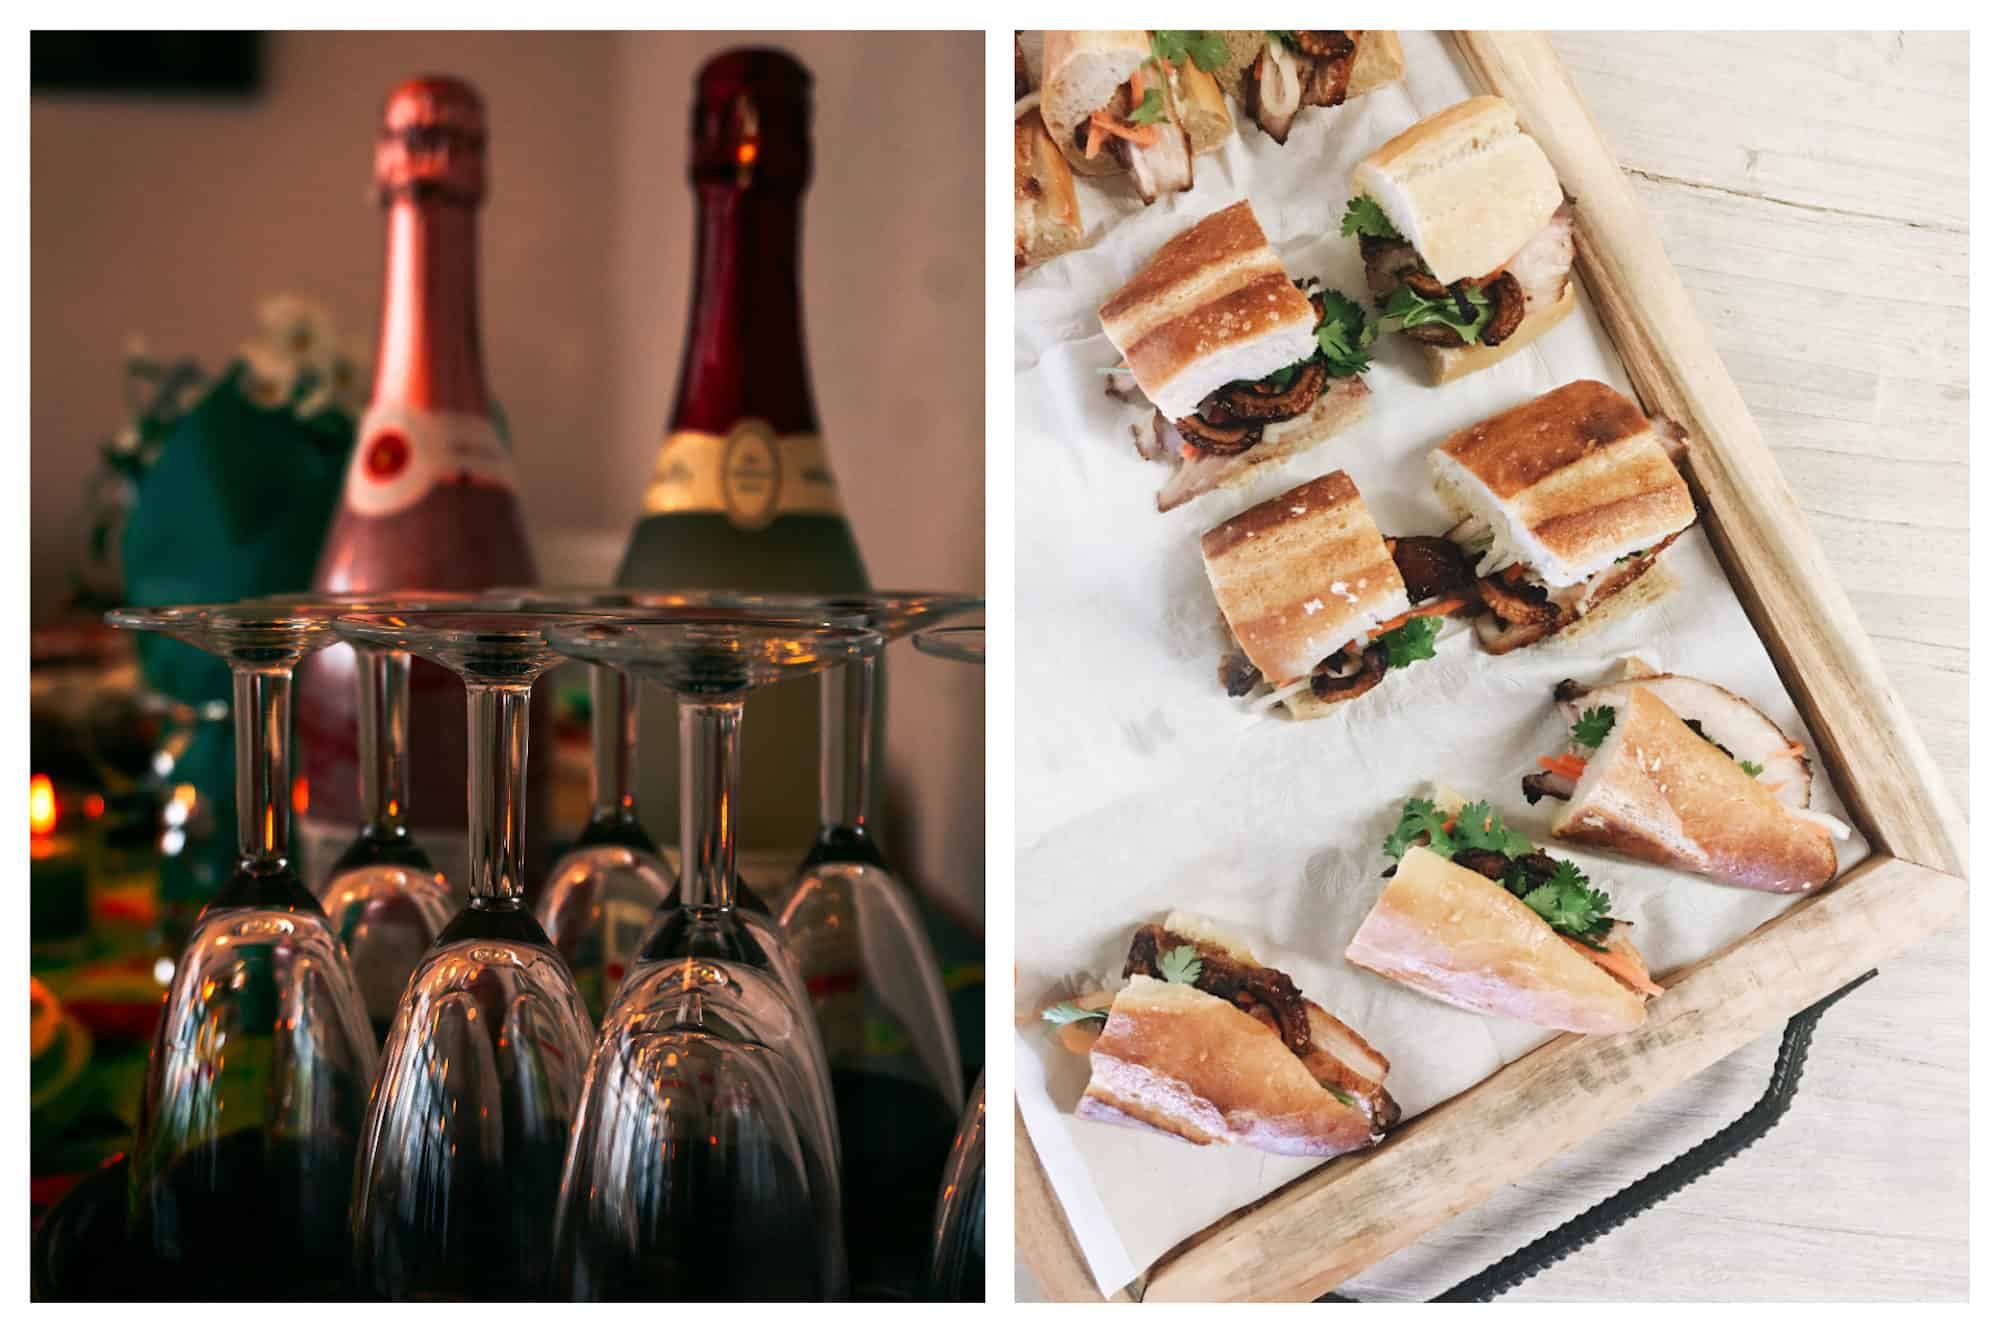 Two champagne bottles and glasses waiting to be filled for New Year's Eve (left). Baguette canapés on a tray (right). 